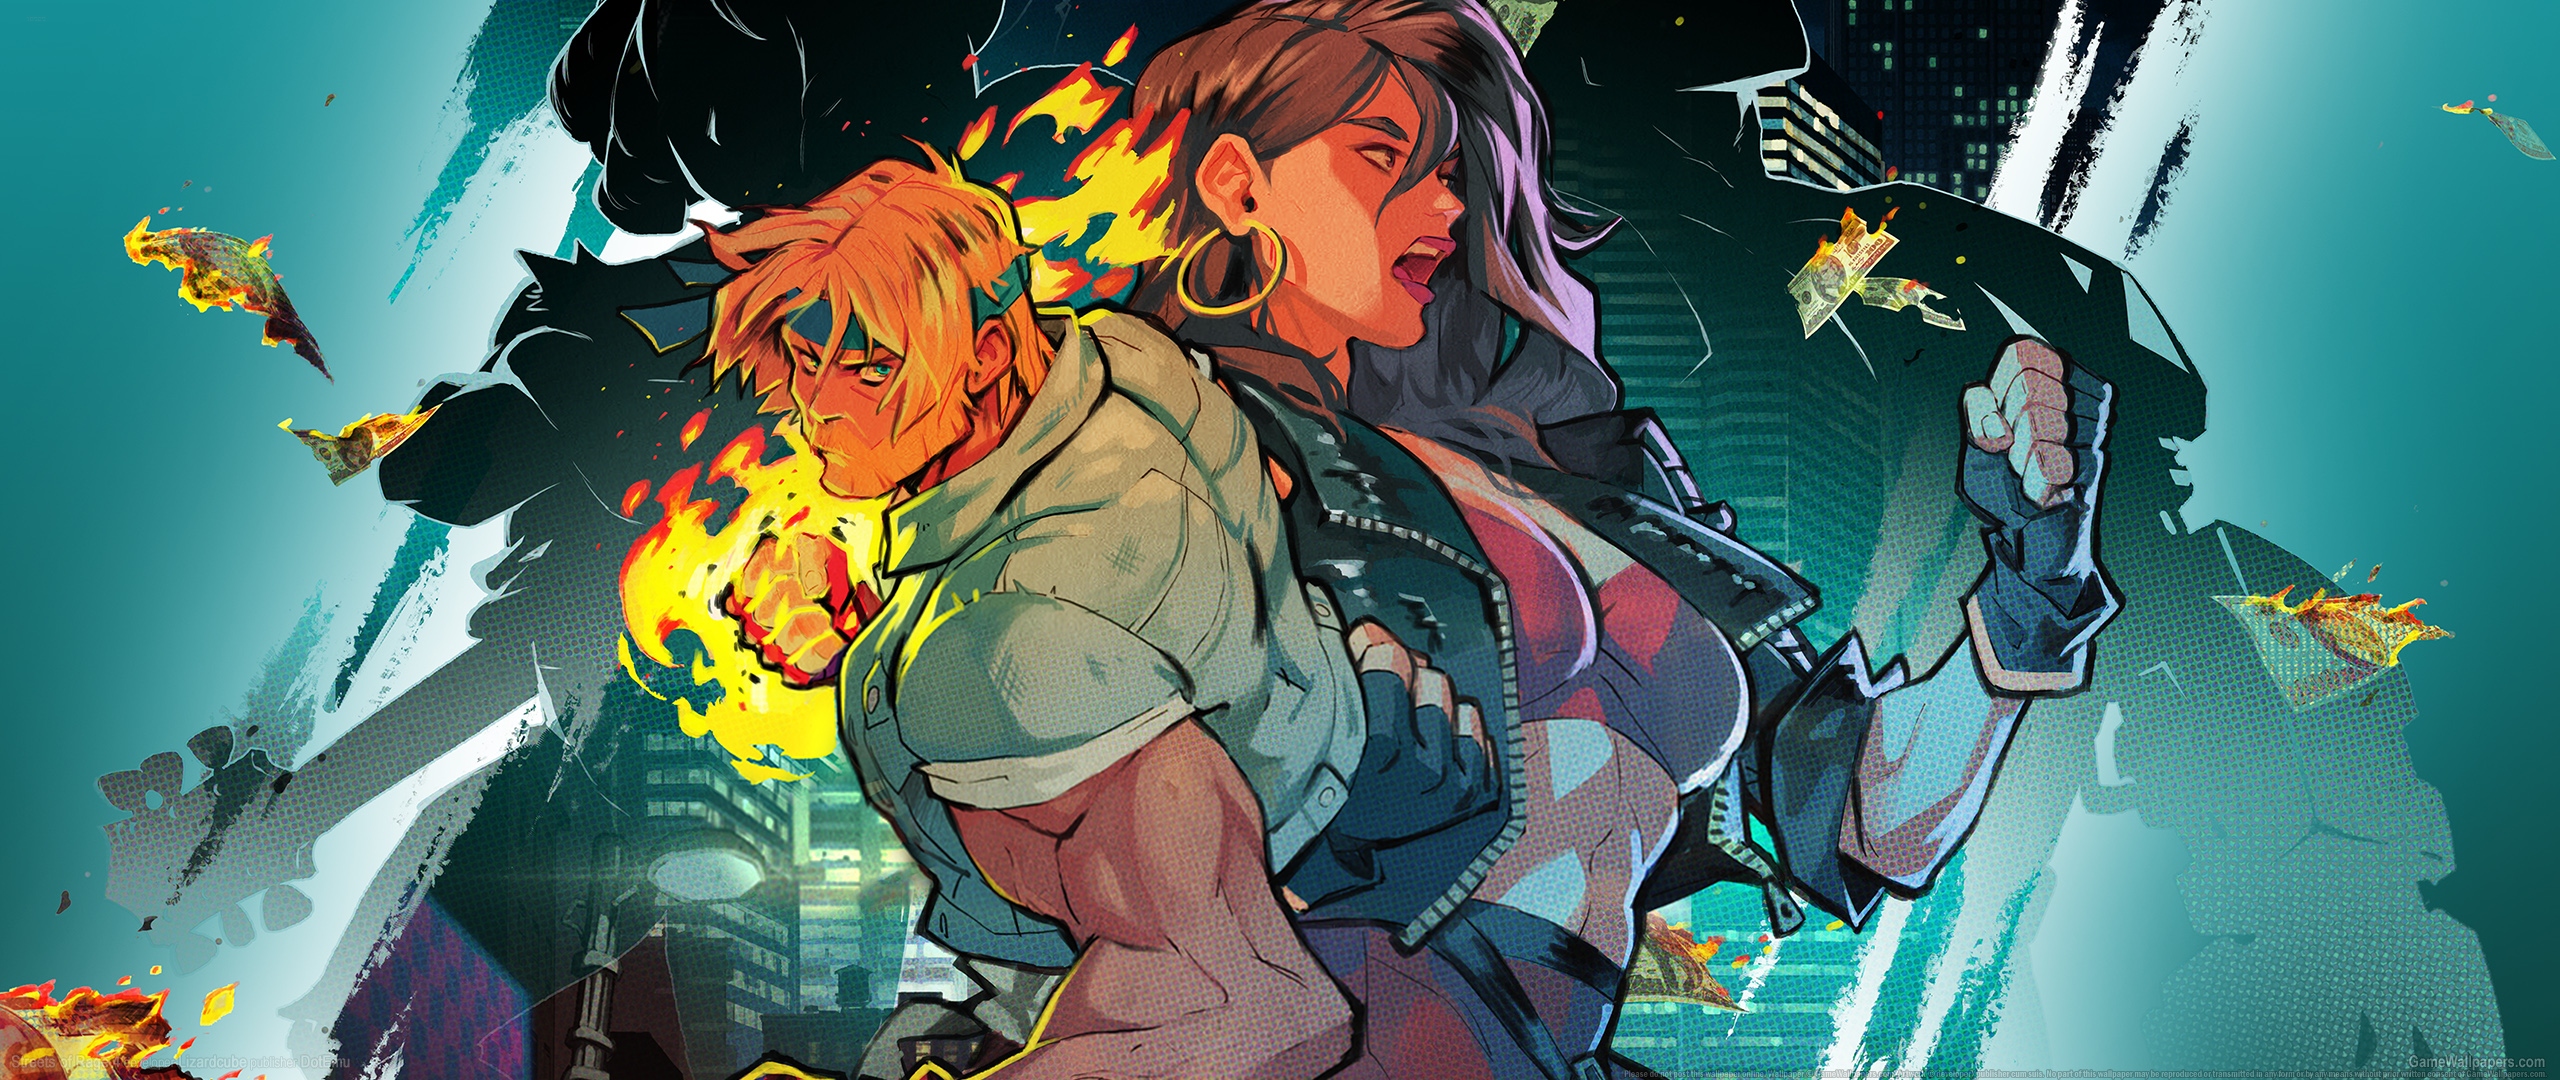 Streets of Rage 4 2560x1080 wallpaper or background 01